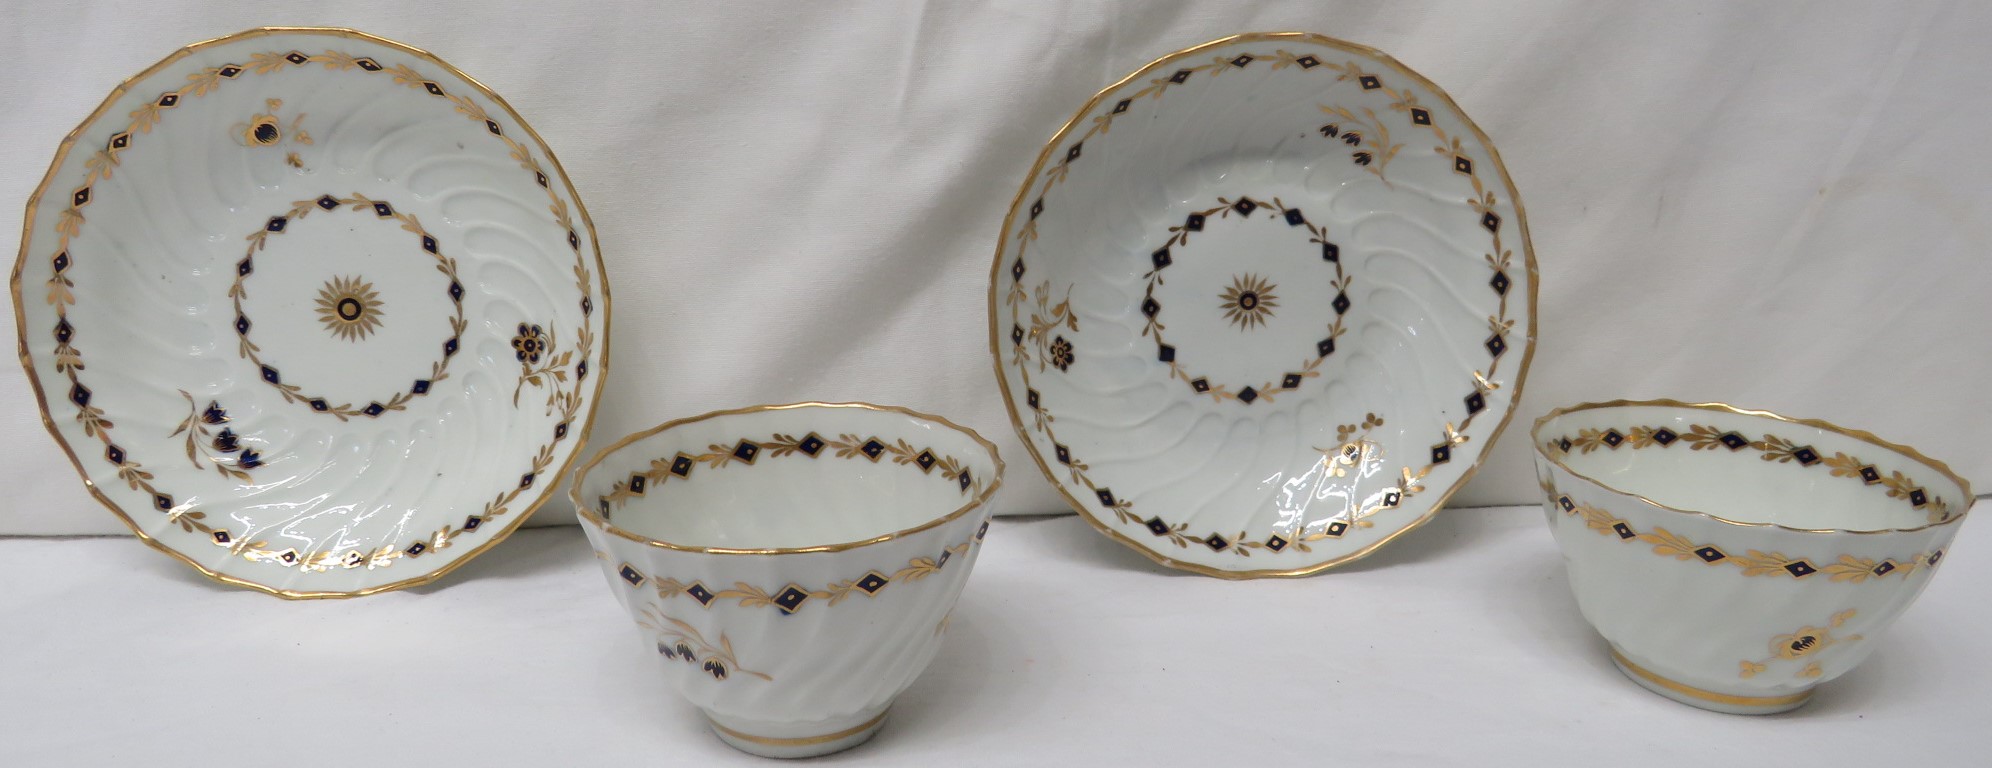 Two 19th century wrythen porcelain tea bowls and saucers, probably Worcester, each similarly - Image 2 of 4